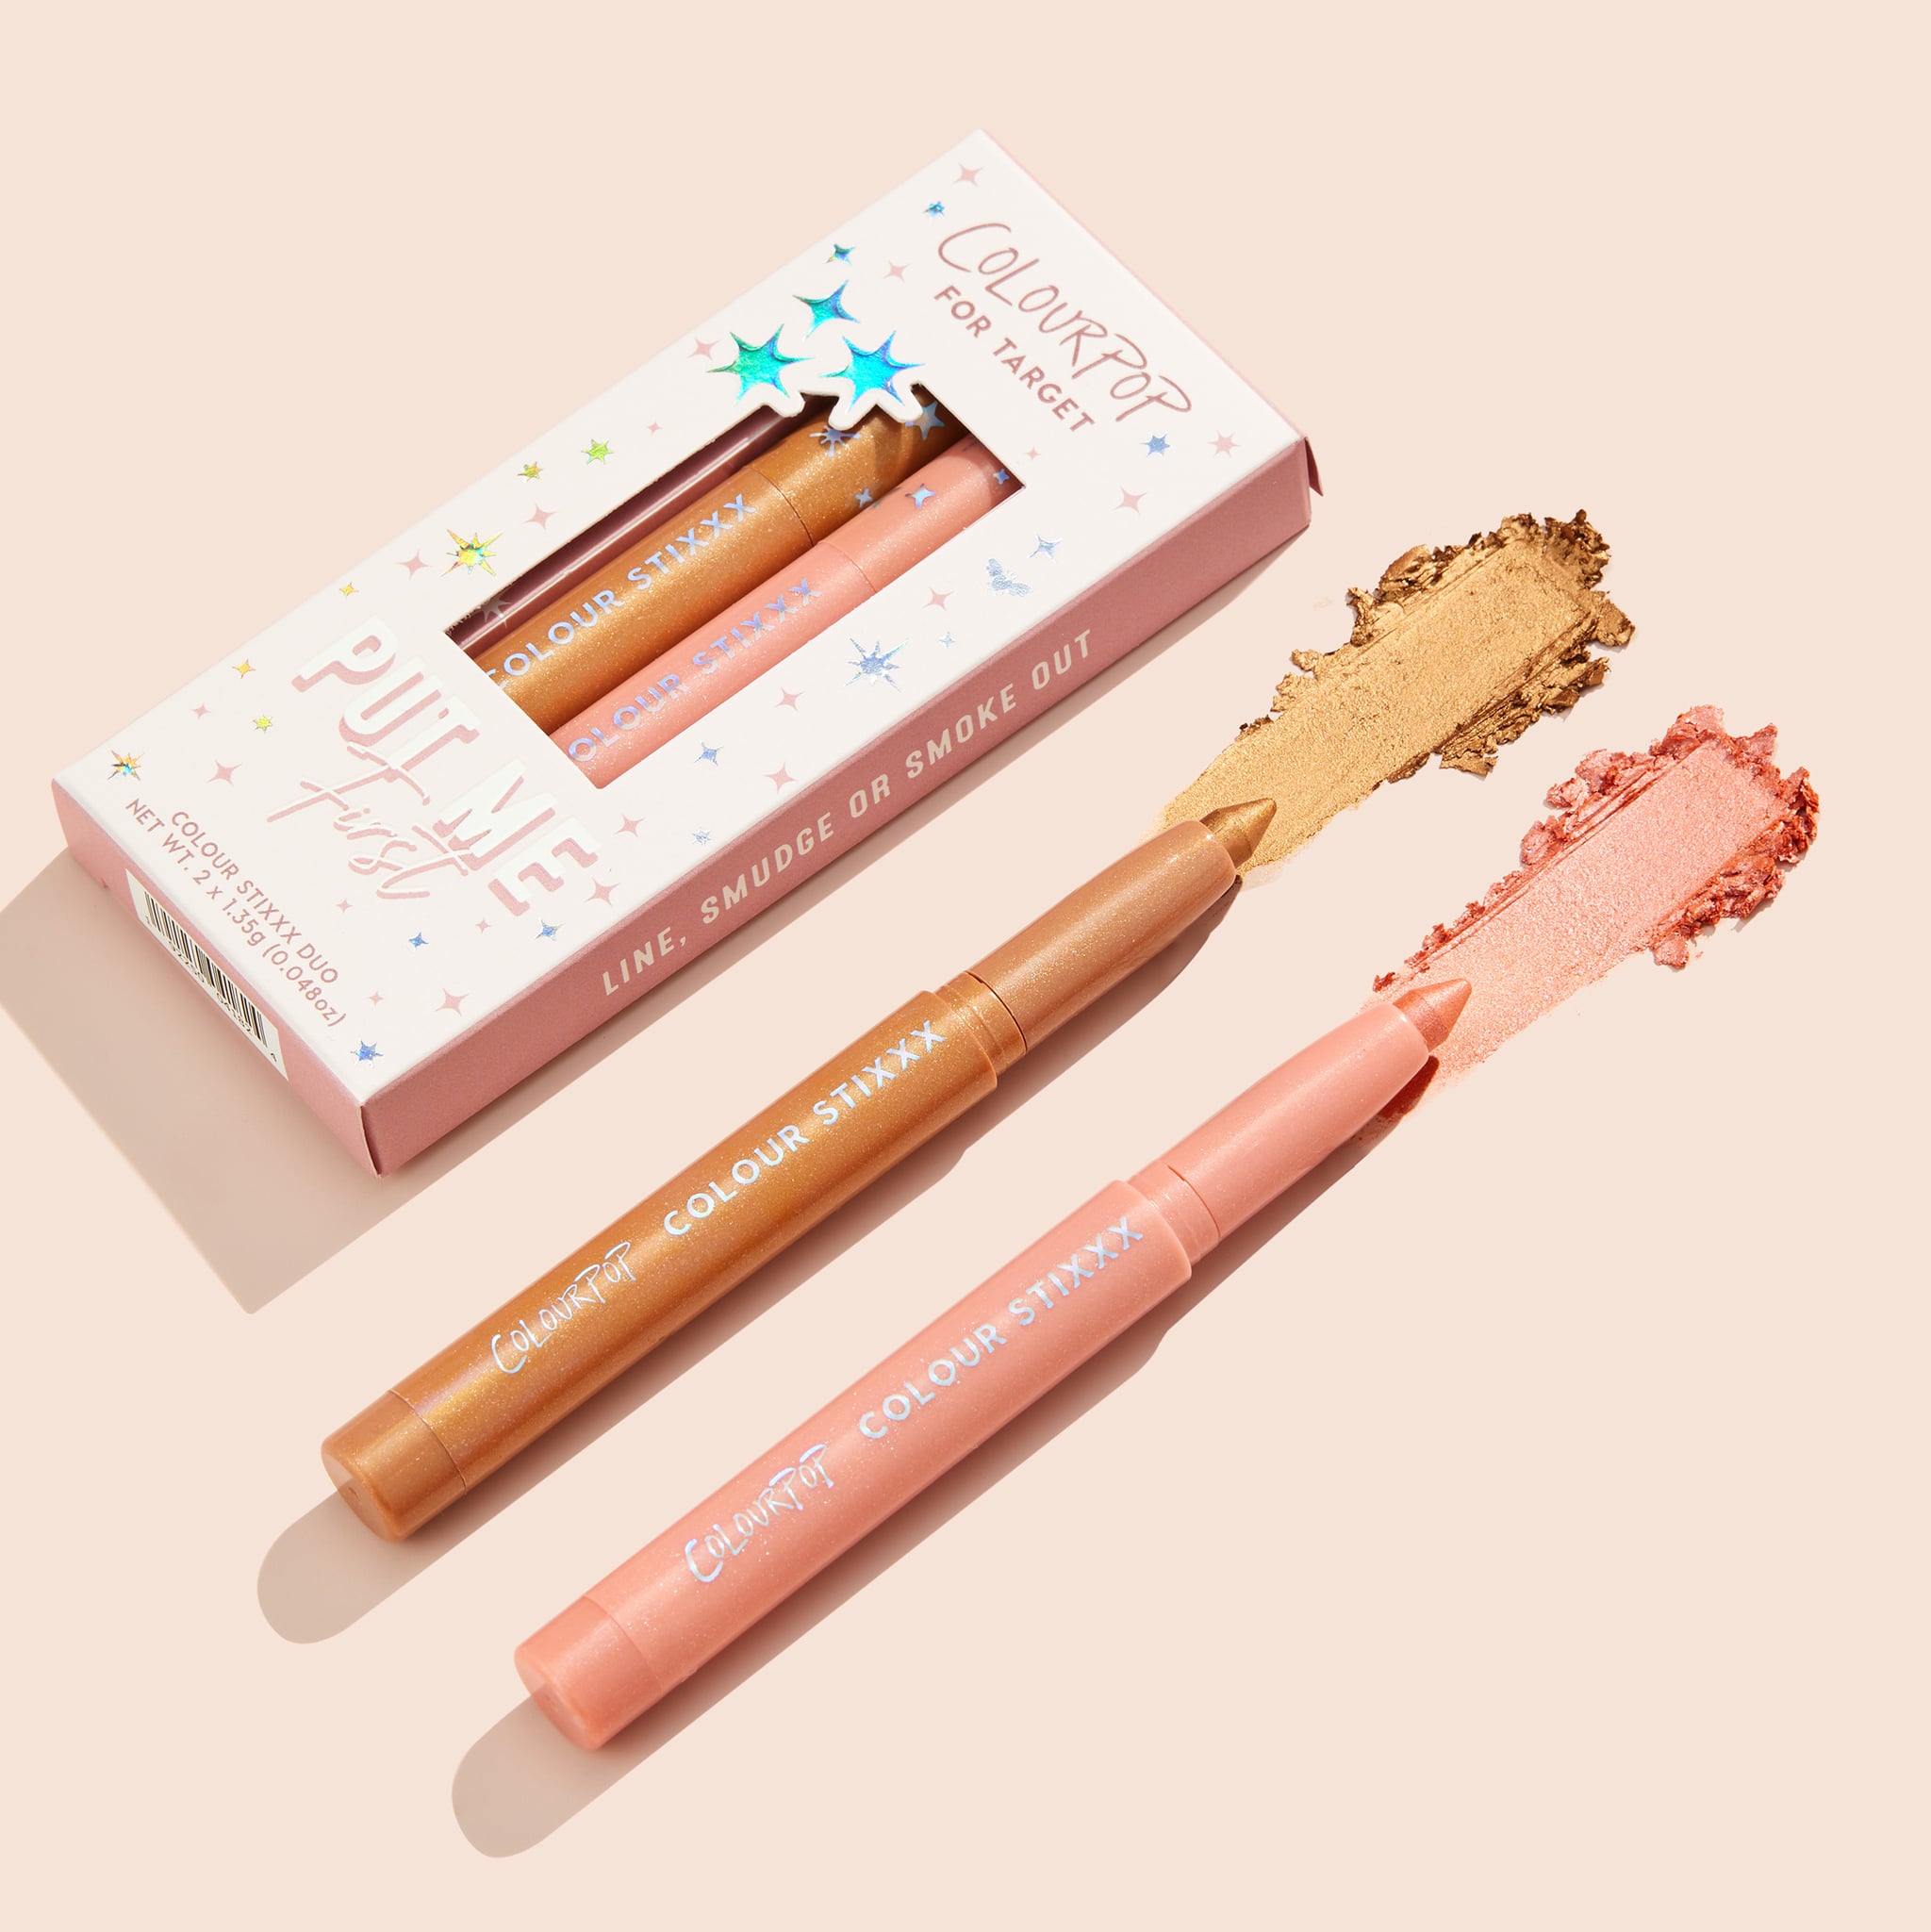 ColourPop for Target Has Officially Launched, and It's Stocked With Eye and  Lip Must-Haves